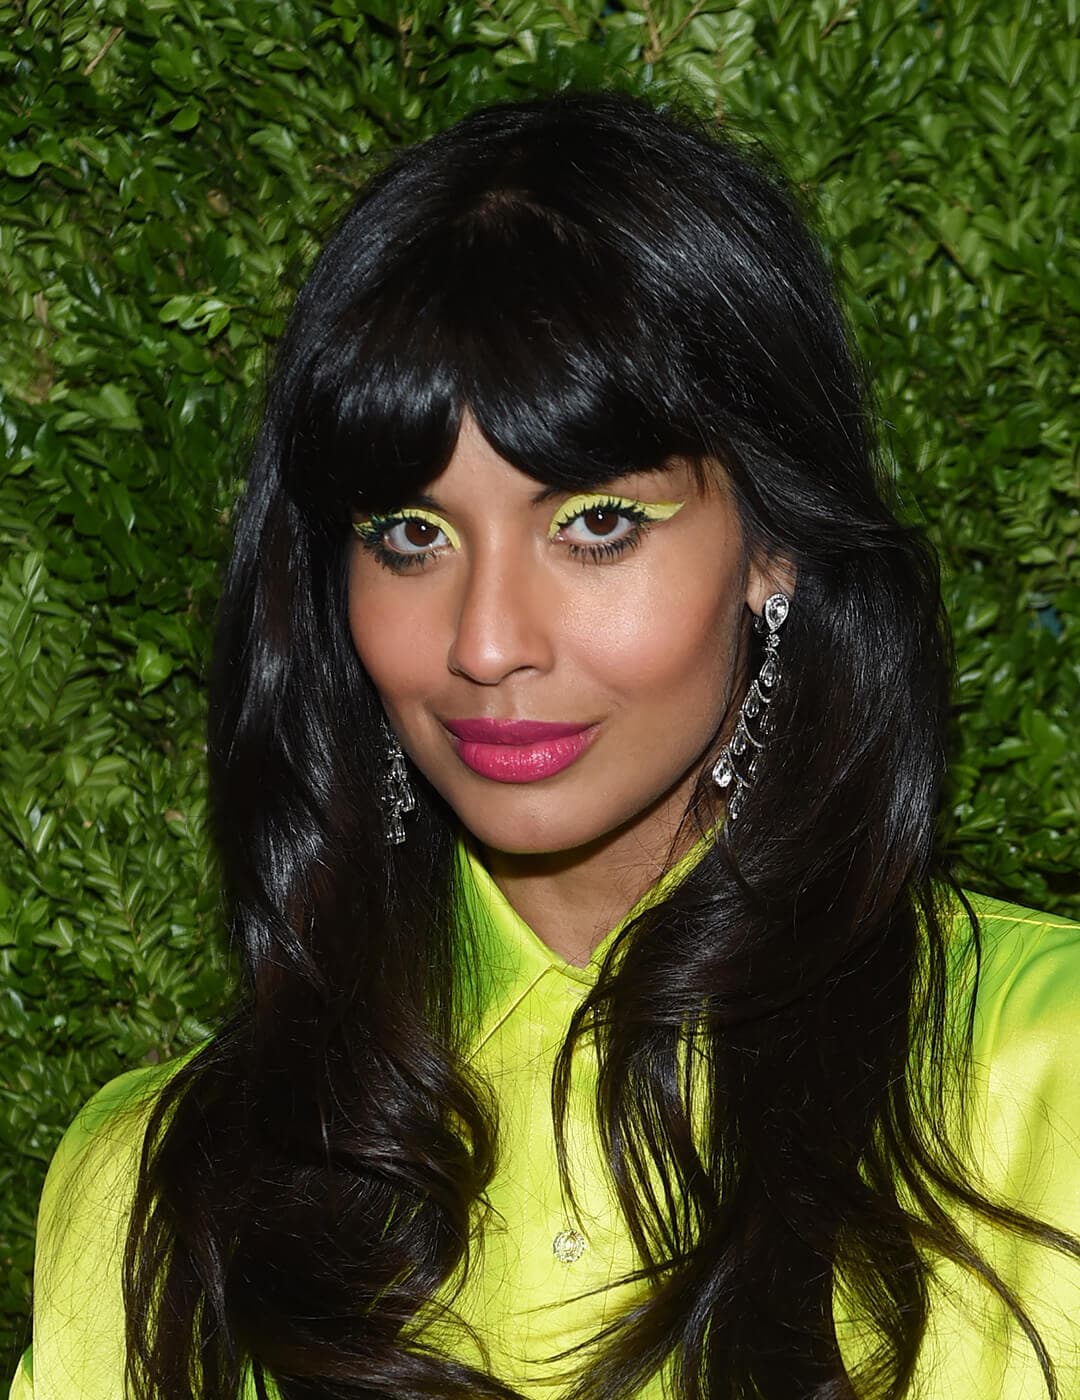 Jameela Jamil rocking a neon yellow eyeliner makeup look and neon yellow dress at the red carpet